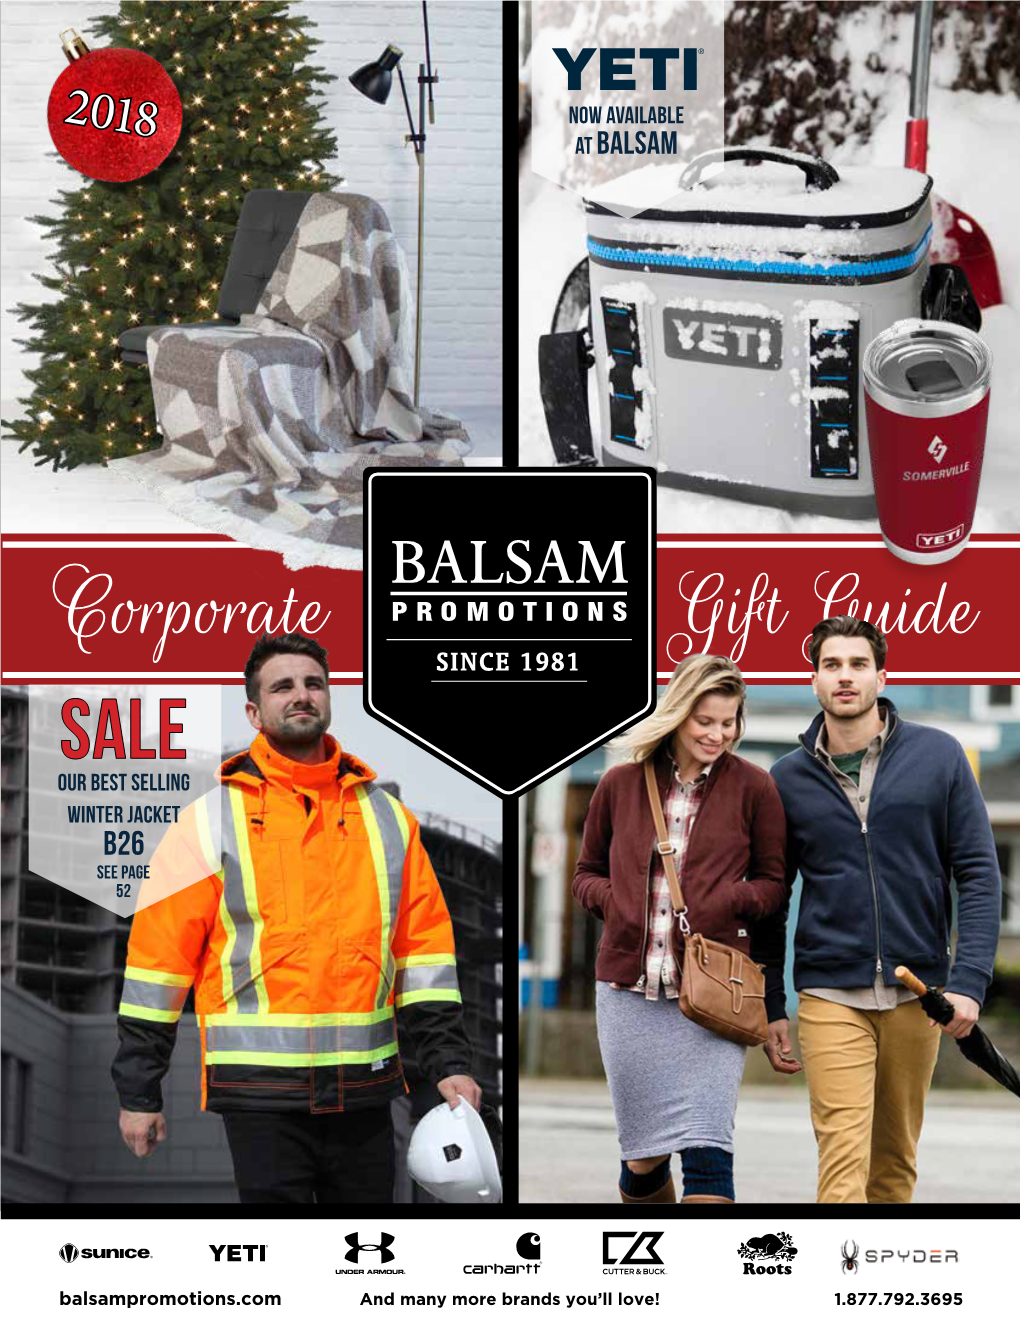 Corporate Gift Guide SALE 2018 OUR BEST Selling Winter Jacket B26 SEE PAGE 52